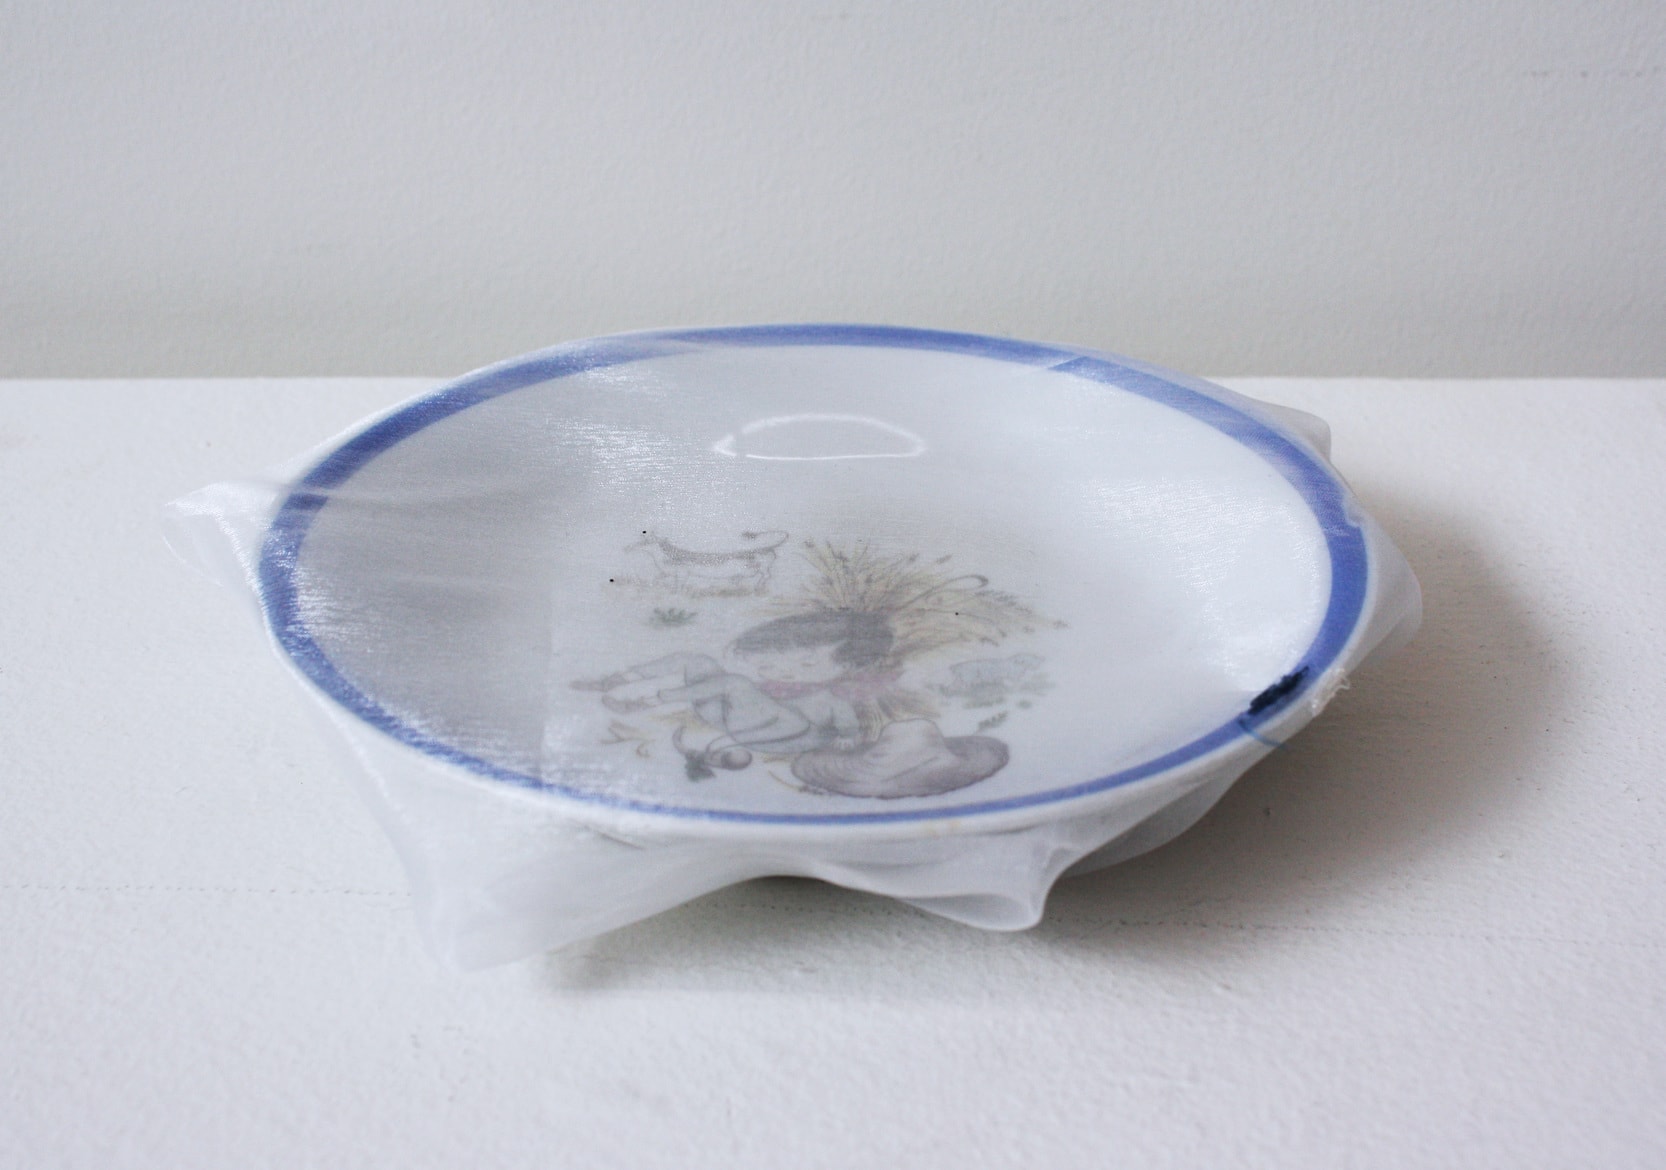 ‘Renovated soup plate for kids’, 2012, ceramic dish, Italian synthetic cloth, Japanese silk thread, 3H x 18D cm